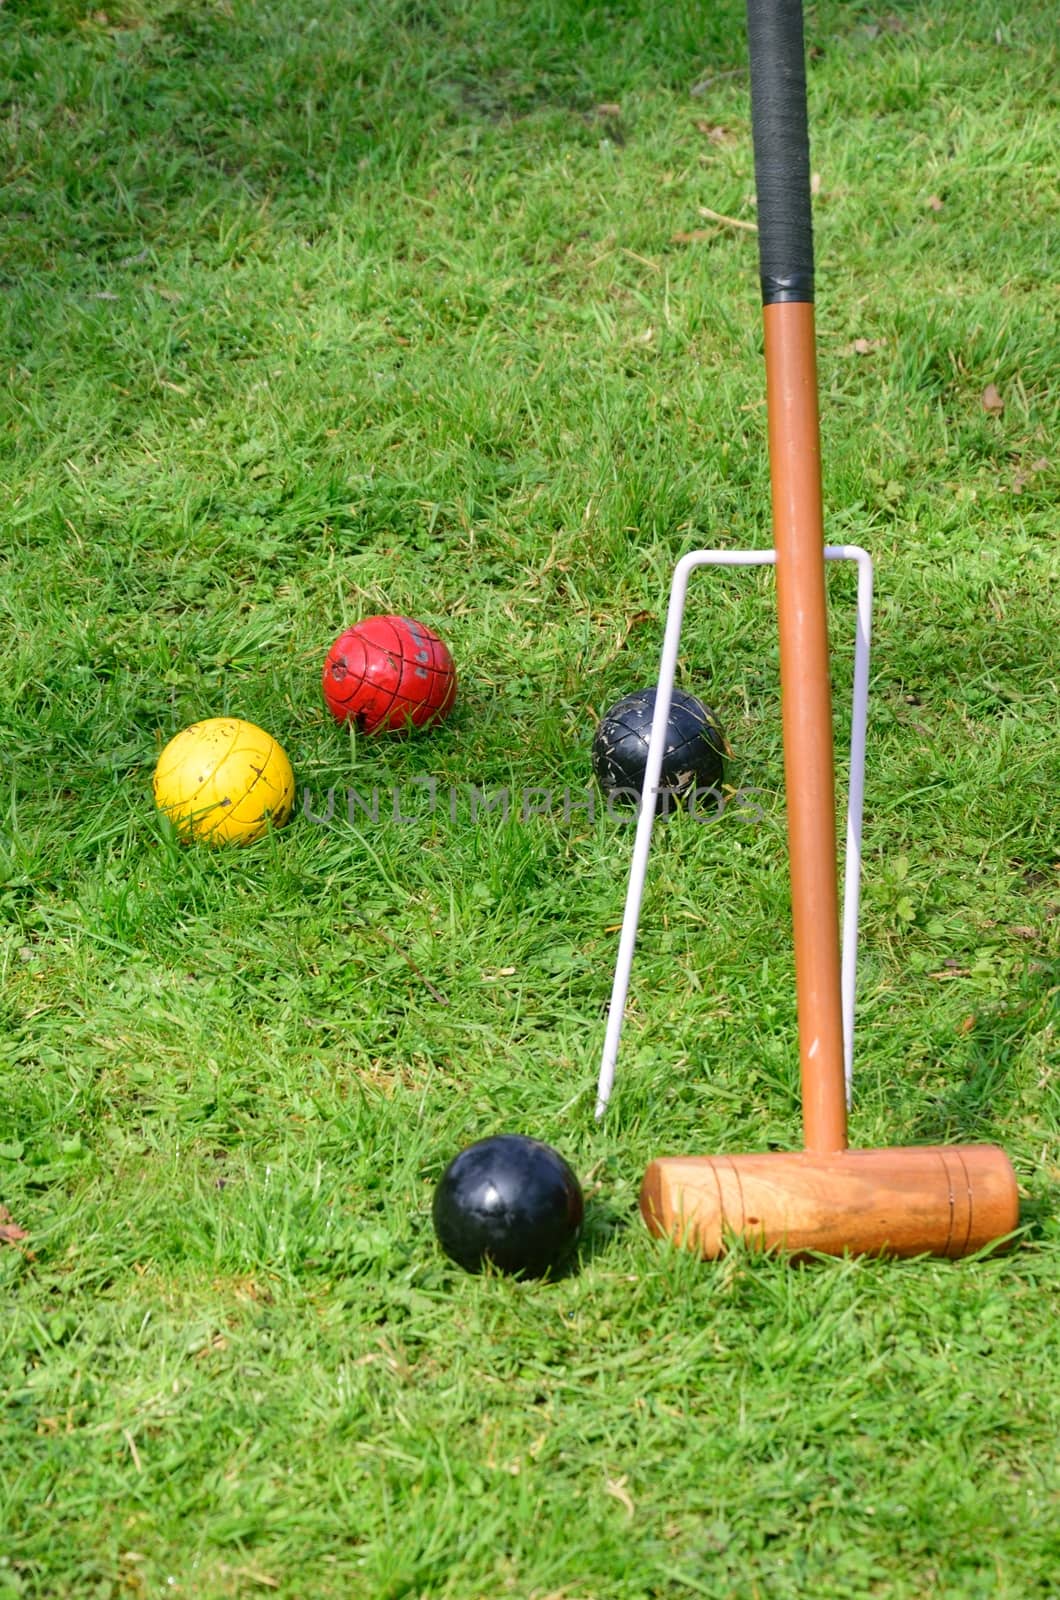 Croquet mallet and balls by pauws99